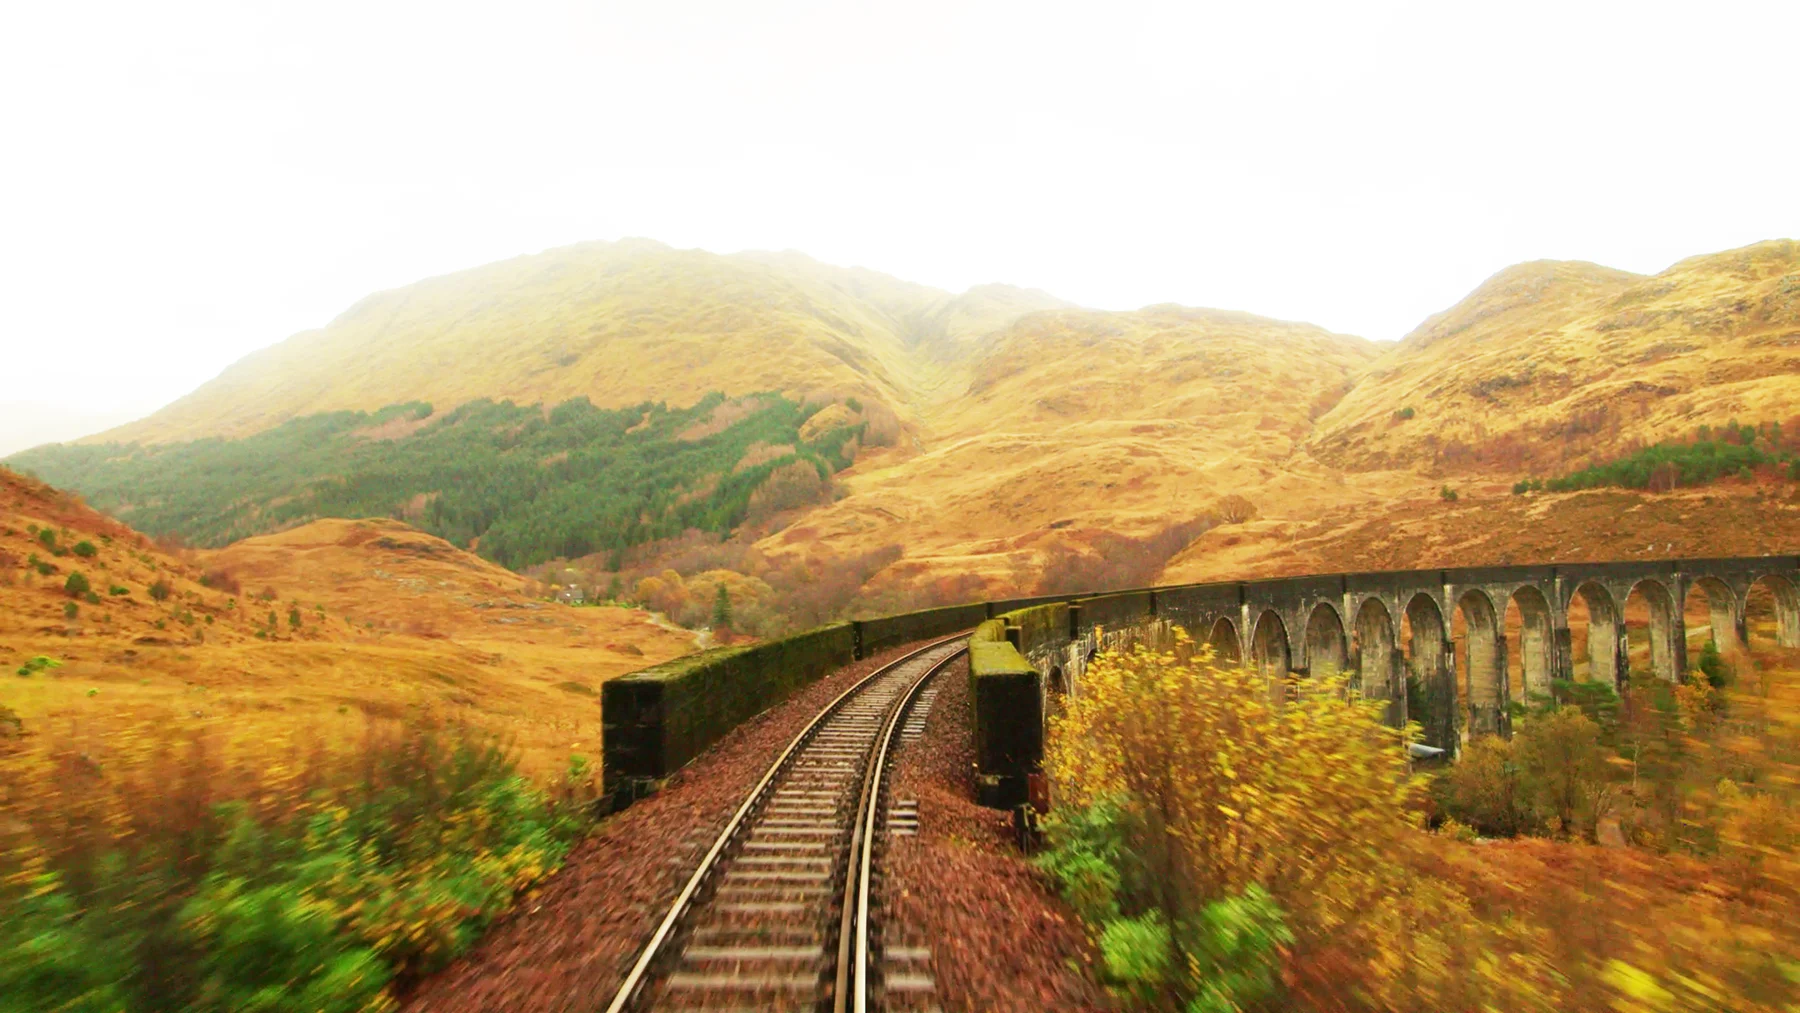 A train driver's eye view of a railway track crossing a viaduct with the Scottish highlands in autumn behind.